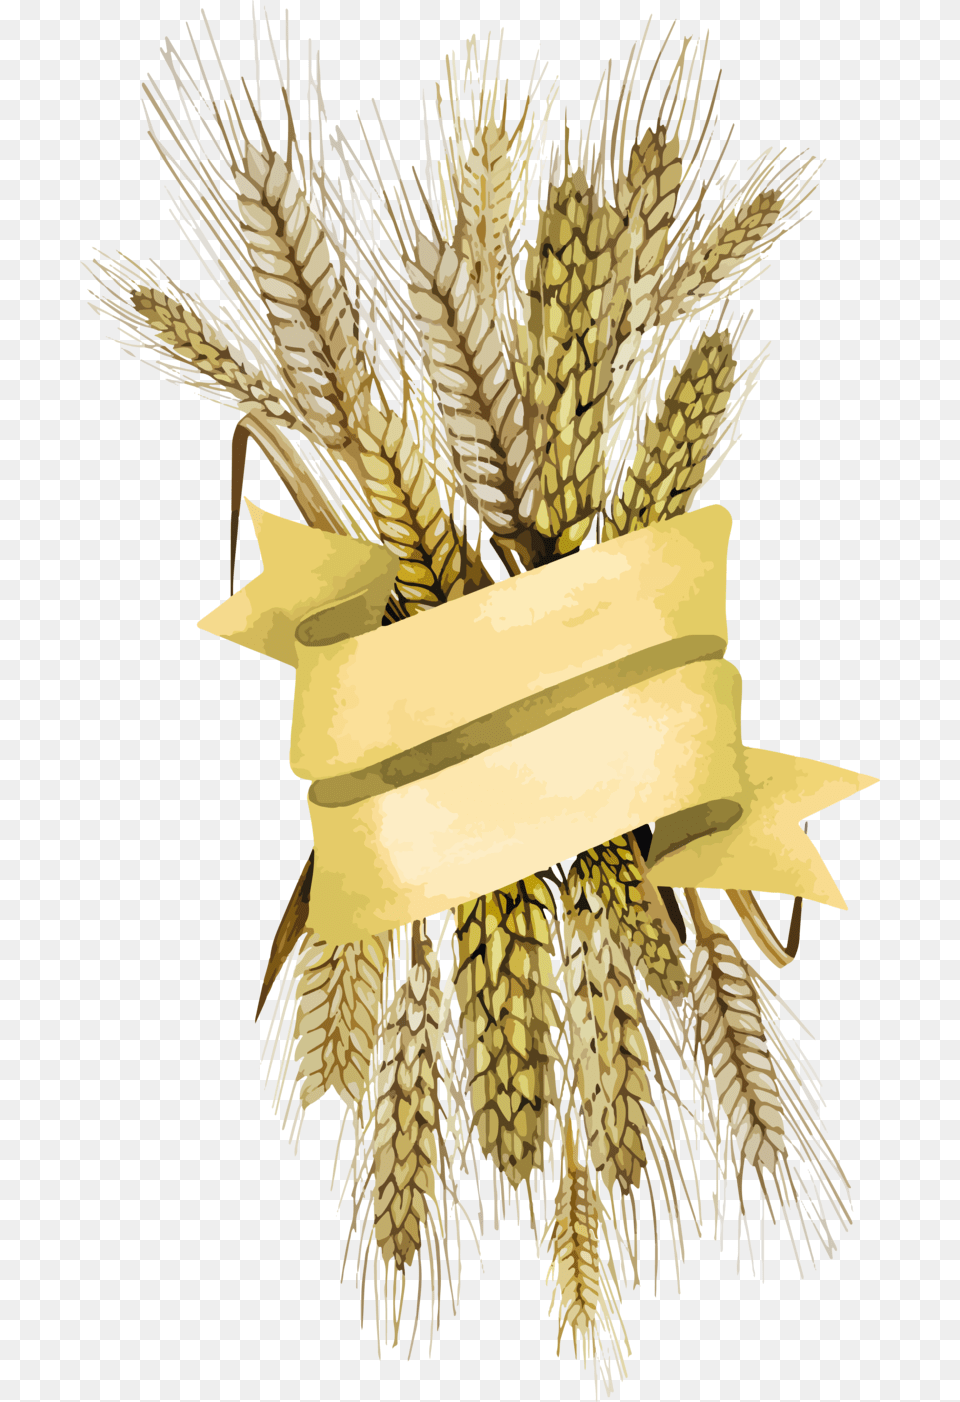 Background Wheat Transparent Transparent Background Wheat, Food, Grain, Produce, Animal Png Image